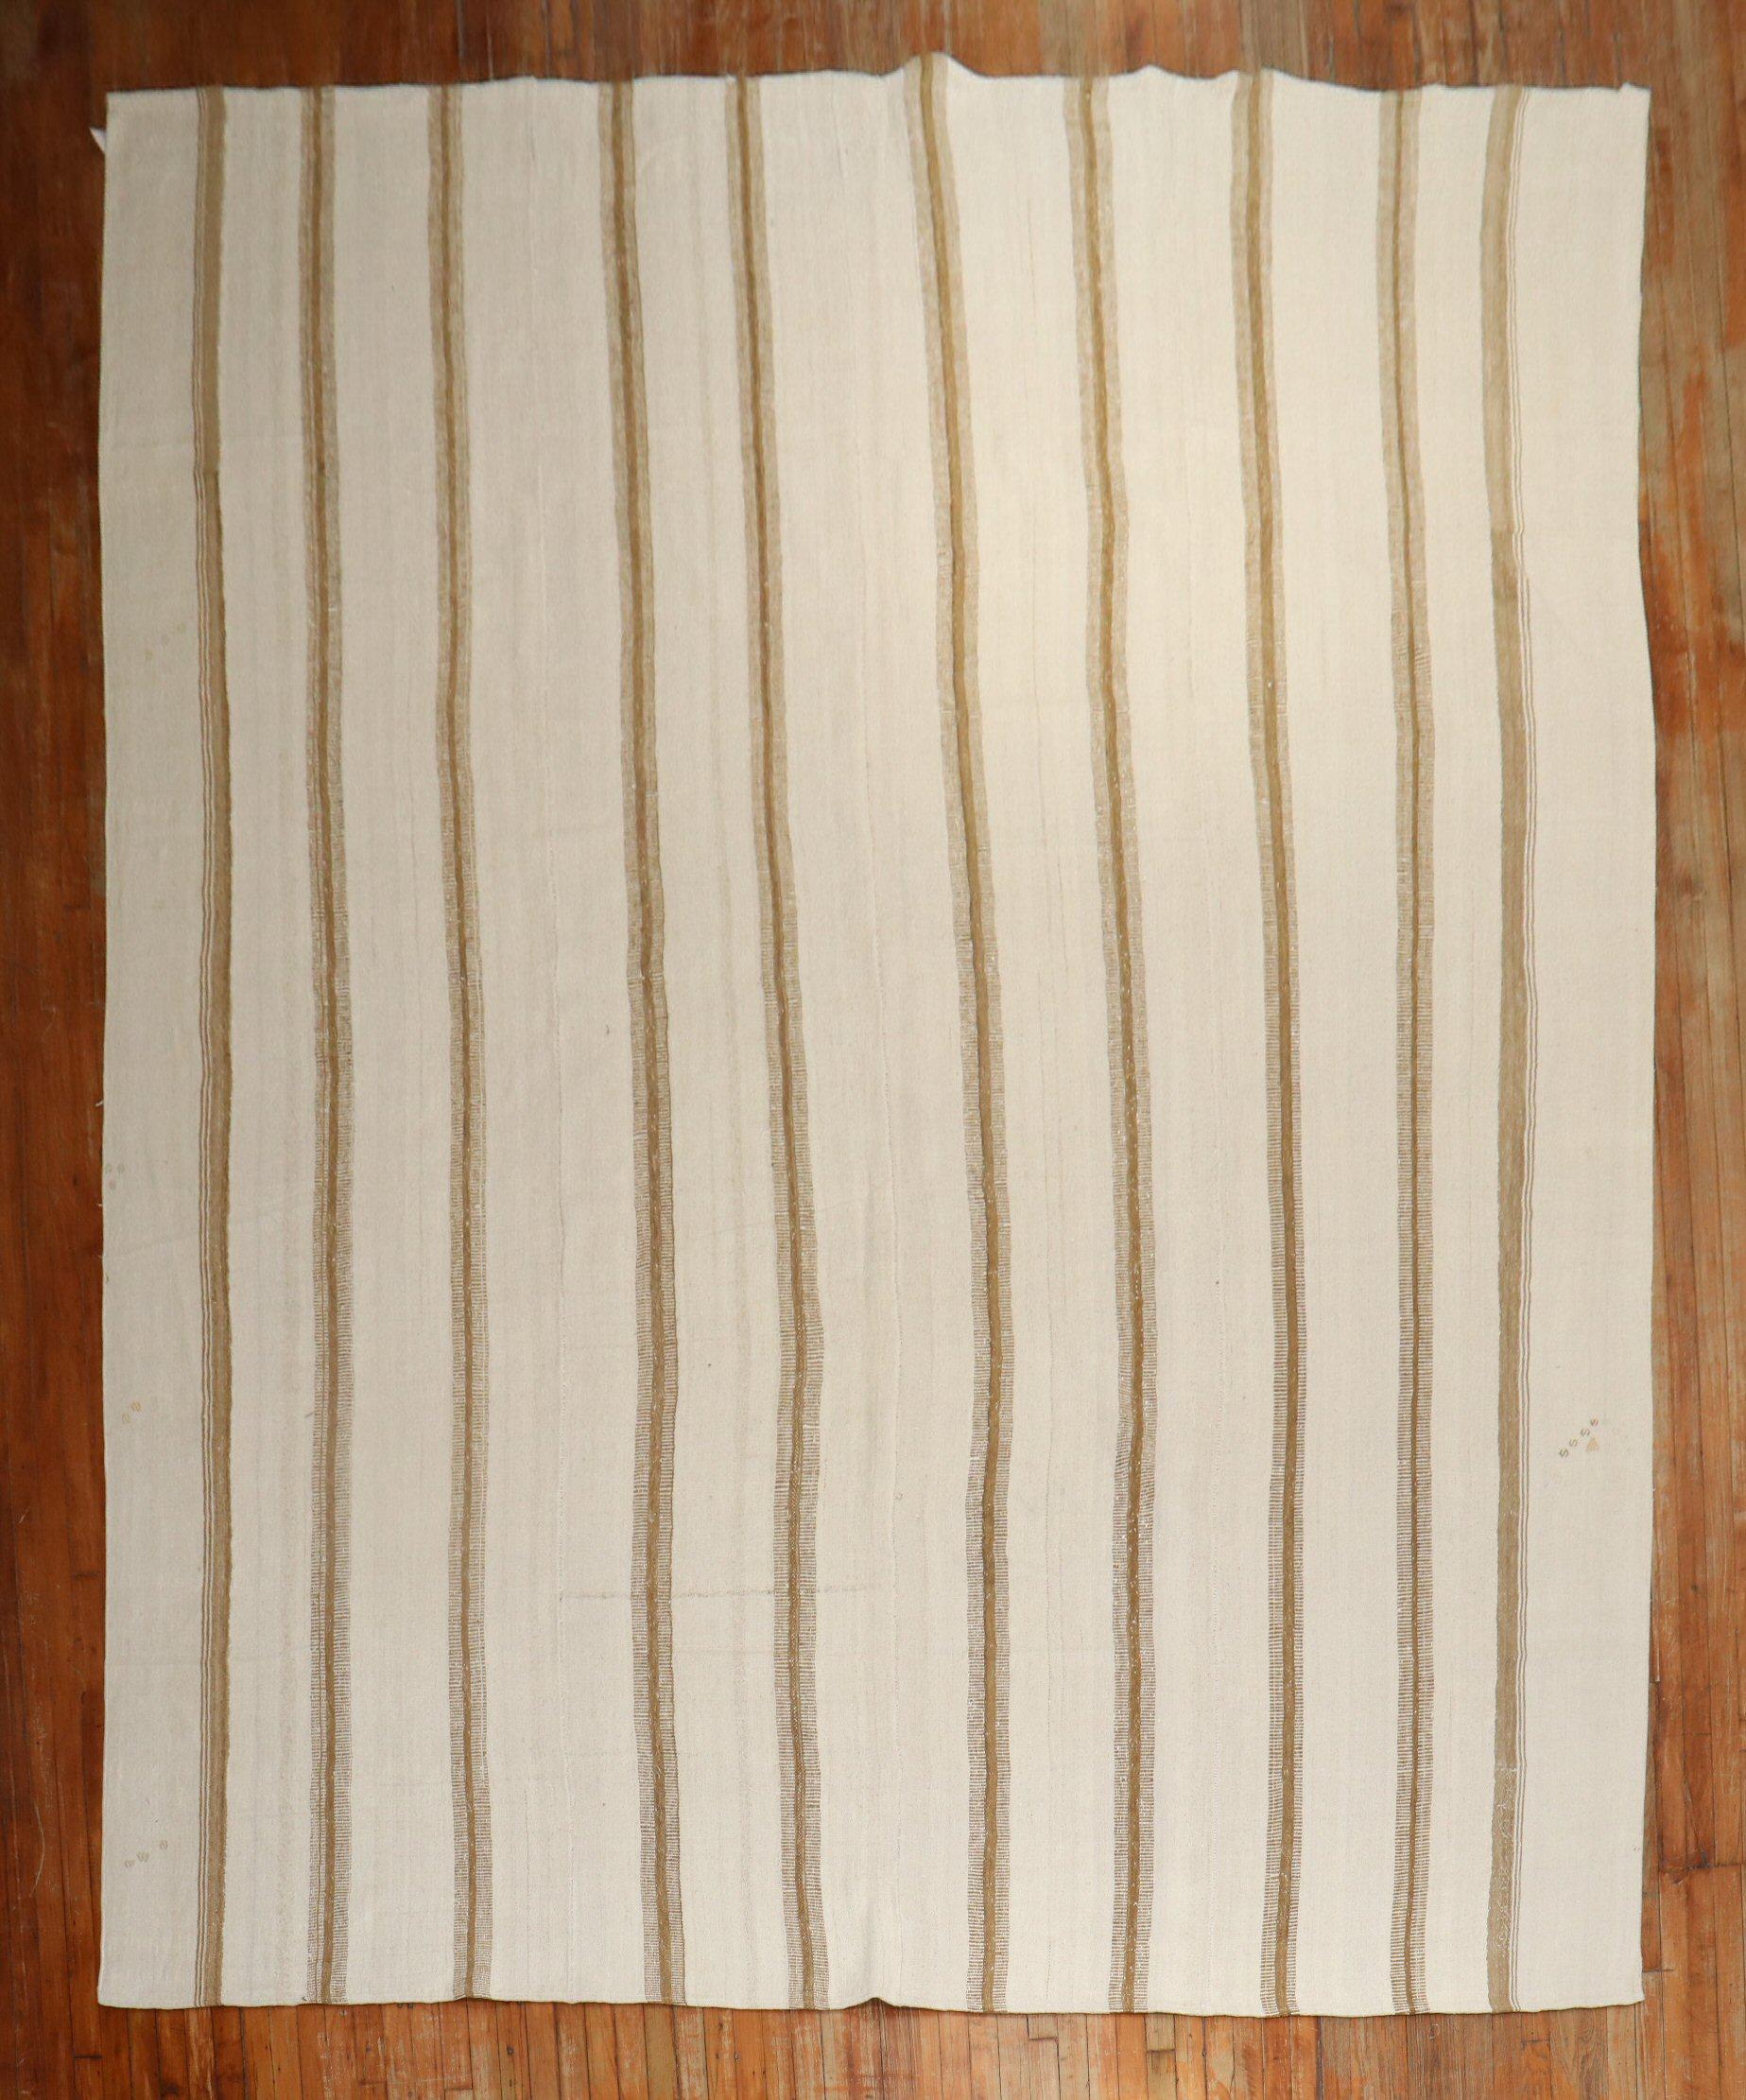 Room- size Turkish Kilim in ivory and brown made from recycled cotton and goat hair material giving it an old world, vintage feel.

Measures: 10'1'' x 14'2''.